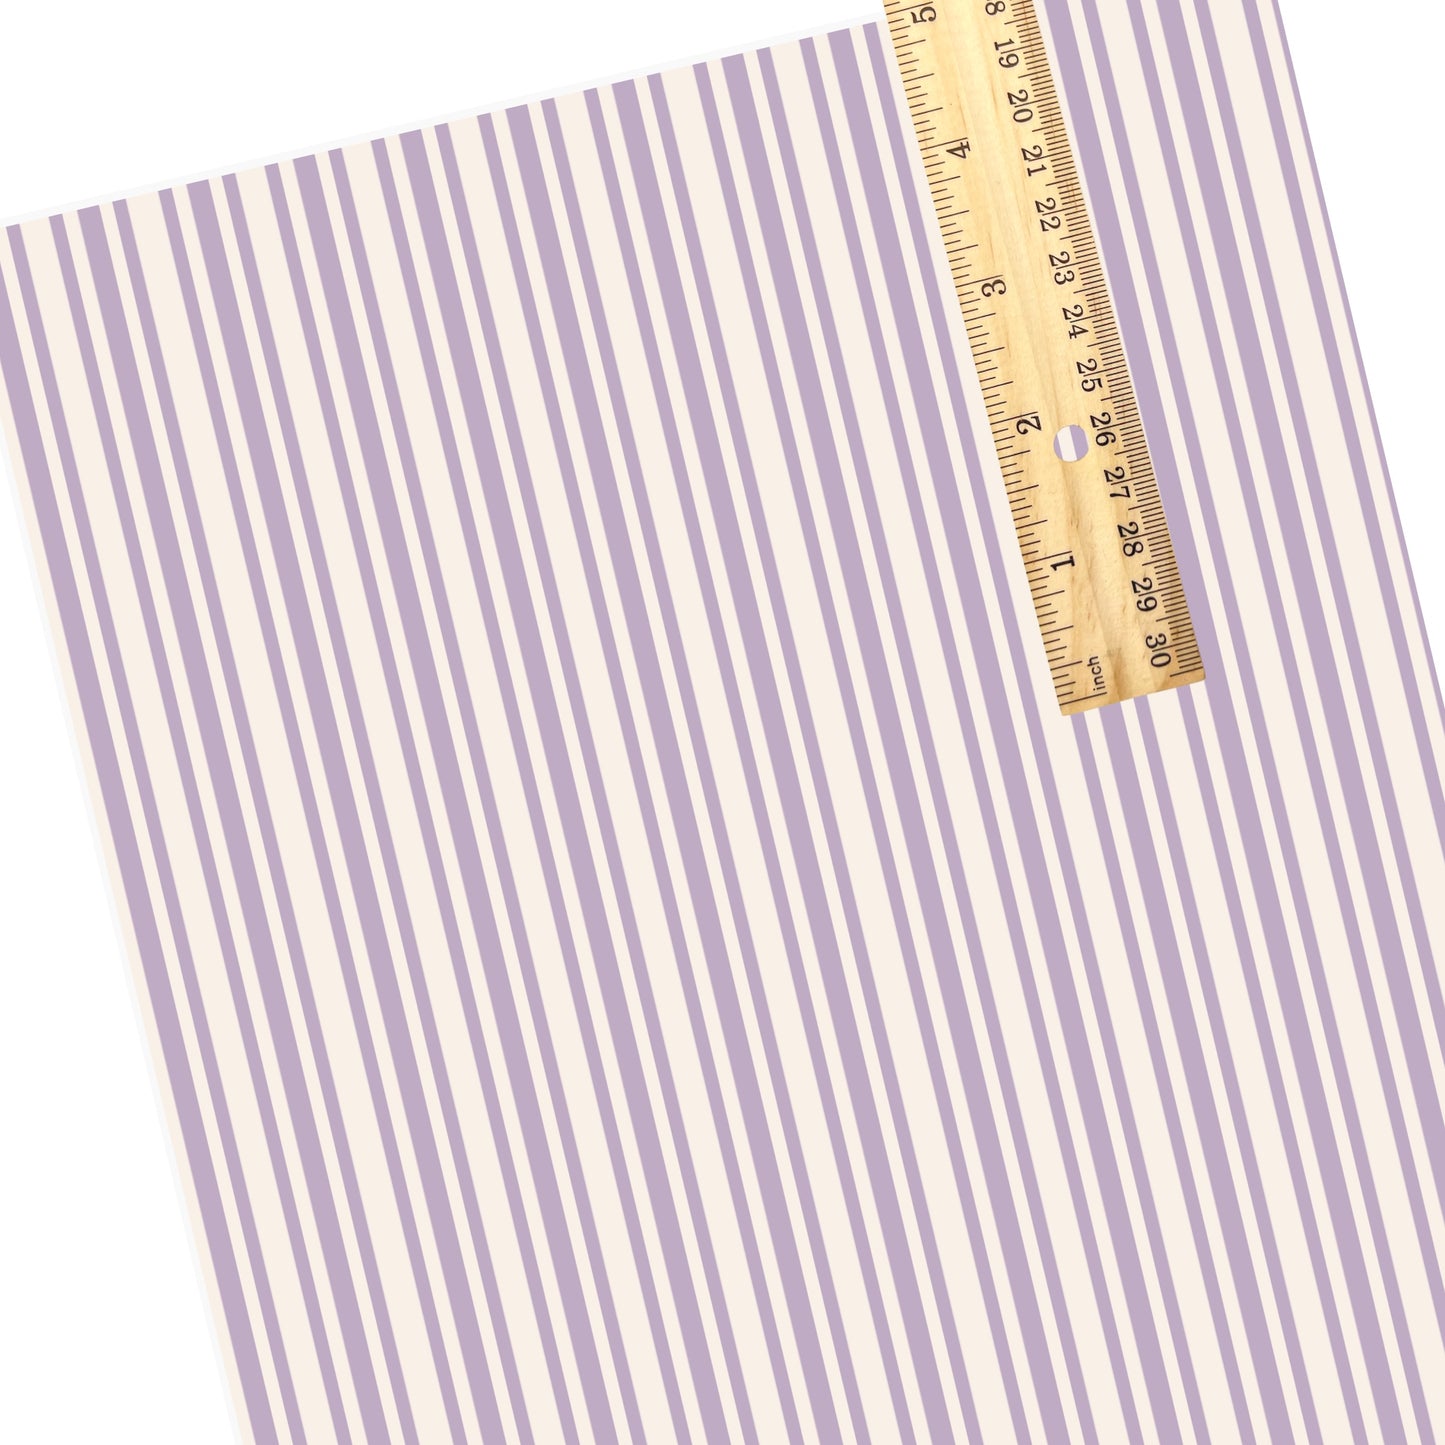 Vertical Pastel stripes cream and purple faux leather sheet.